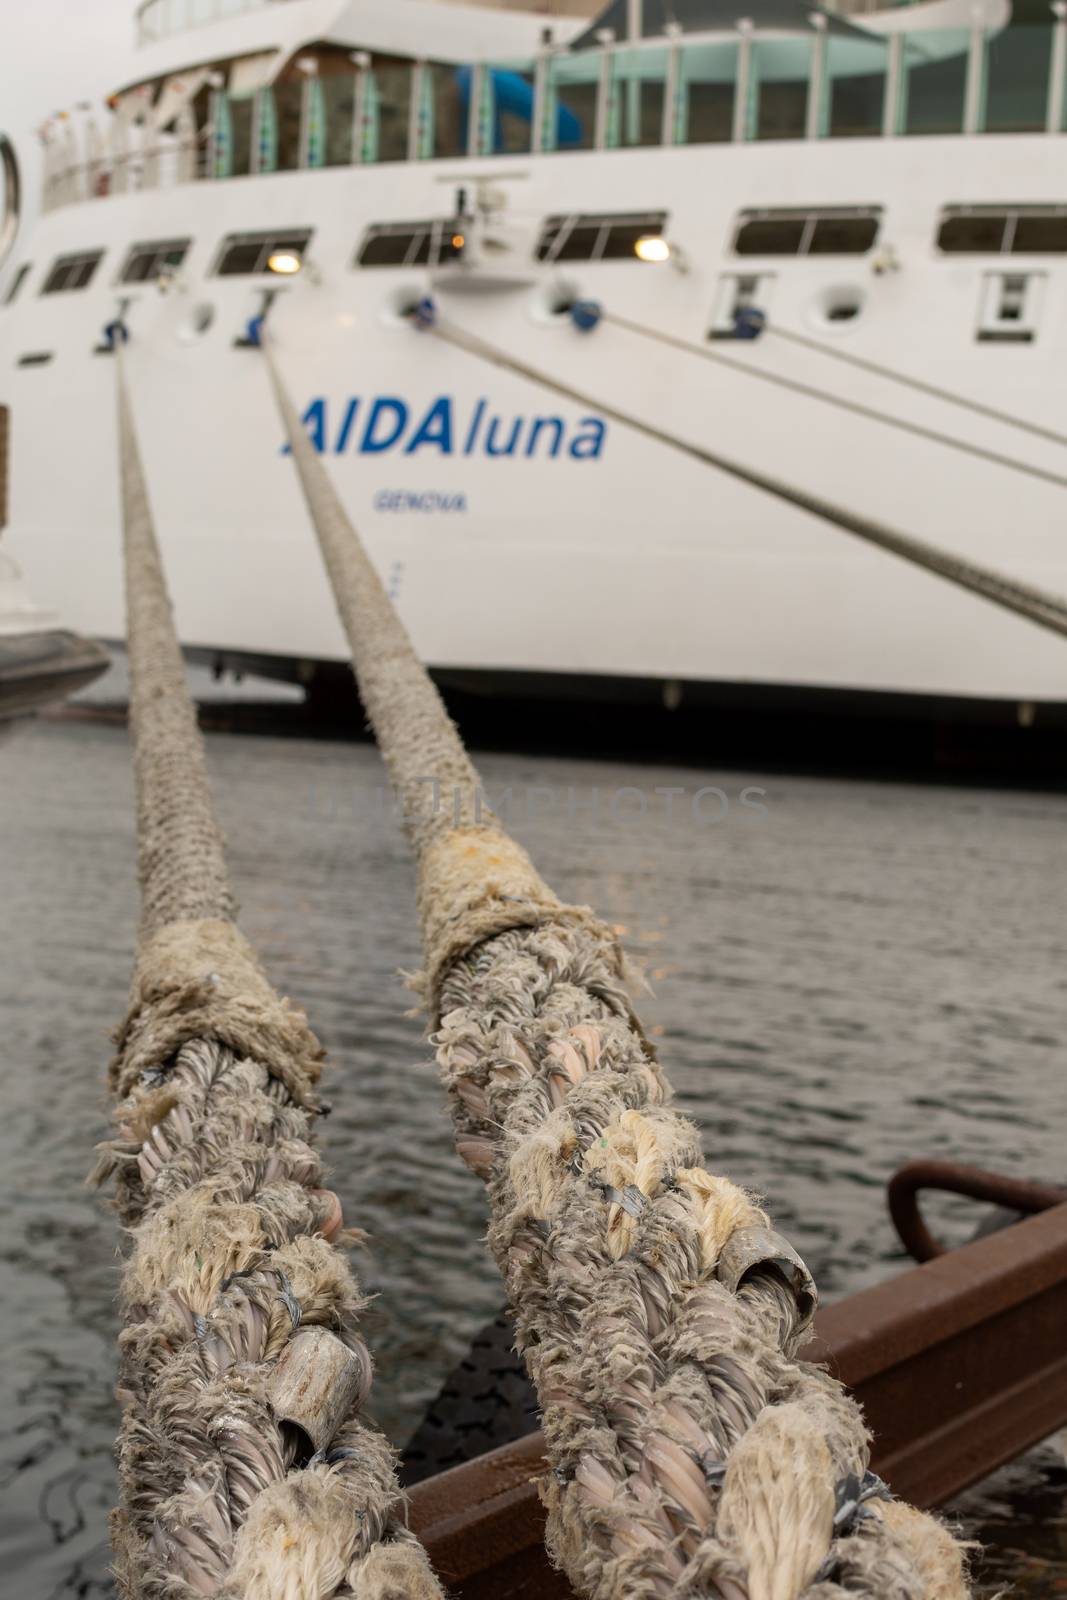 Stavanger, Norway, May 2015: Aida Luna cruise ship moored in the harbor, ropes pulling the ship to quay. Selective Focus.